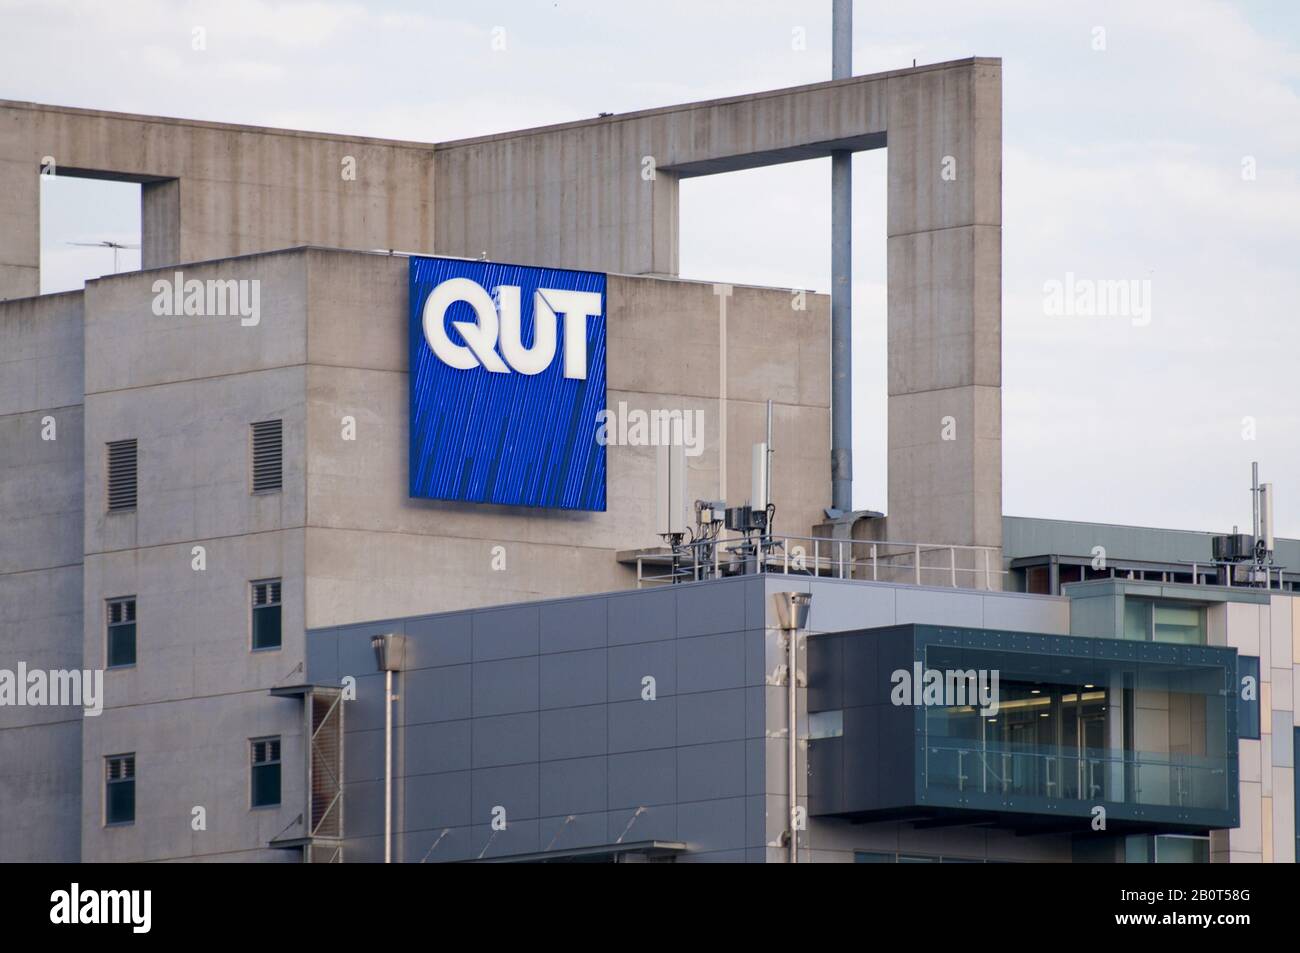 Brisbane, Queensland, Australia - 27th January 2020 : View of the QUT (Queensland University of Technology) sign hanging on the main building in Brisb Stock Photo